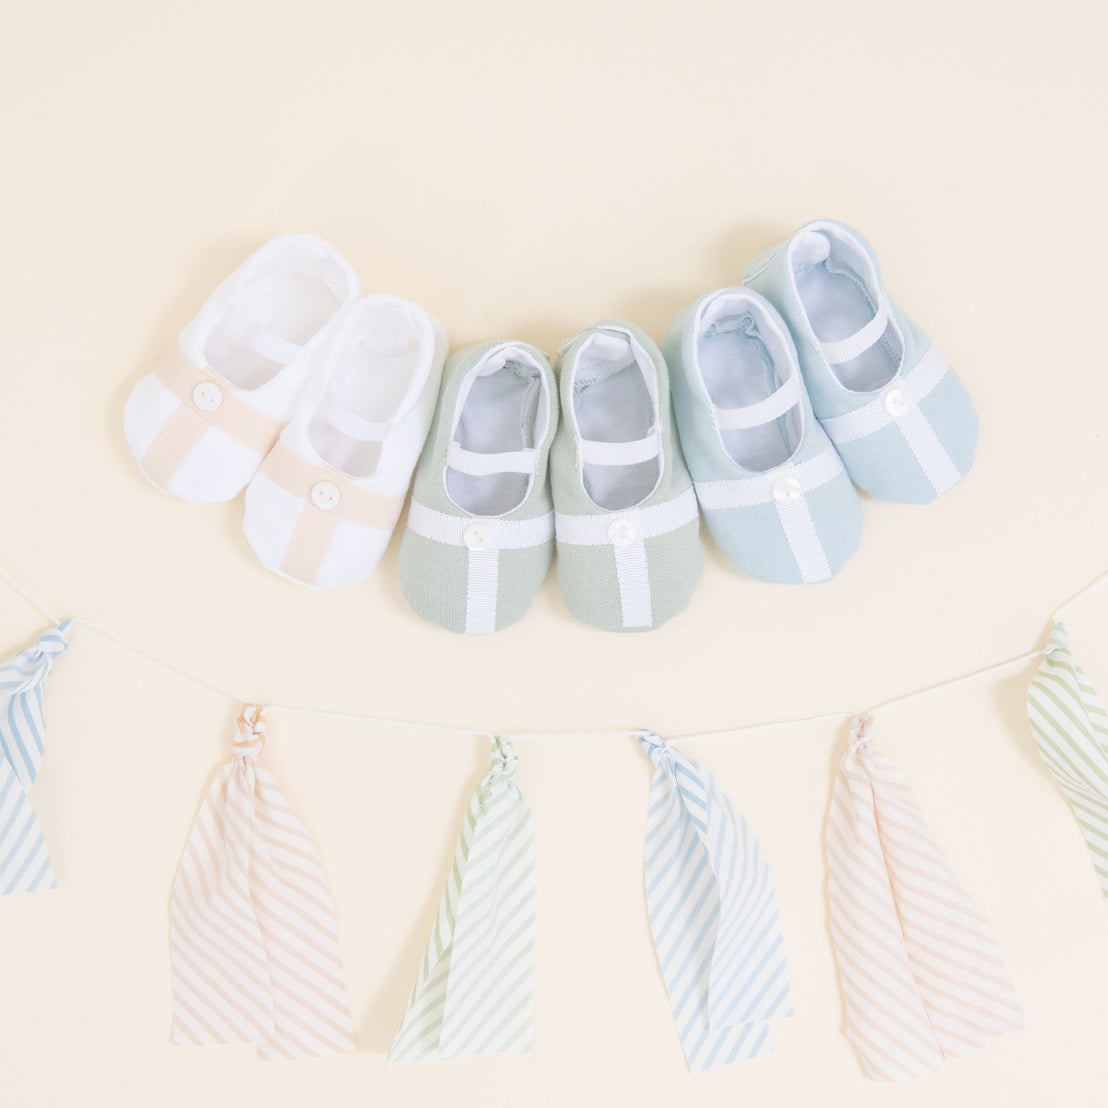 Flat lay photo showing the top detail of three pairs of Theodore Booties, including blue, green, and a white/tan color. The booties are made from a 100% French Terry Cotton with a Grosgrain Trim (with button detail) and soft elastic strap.